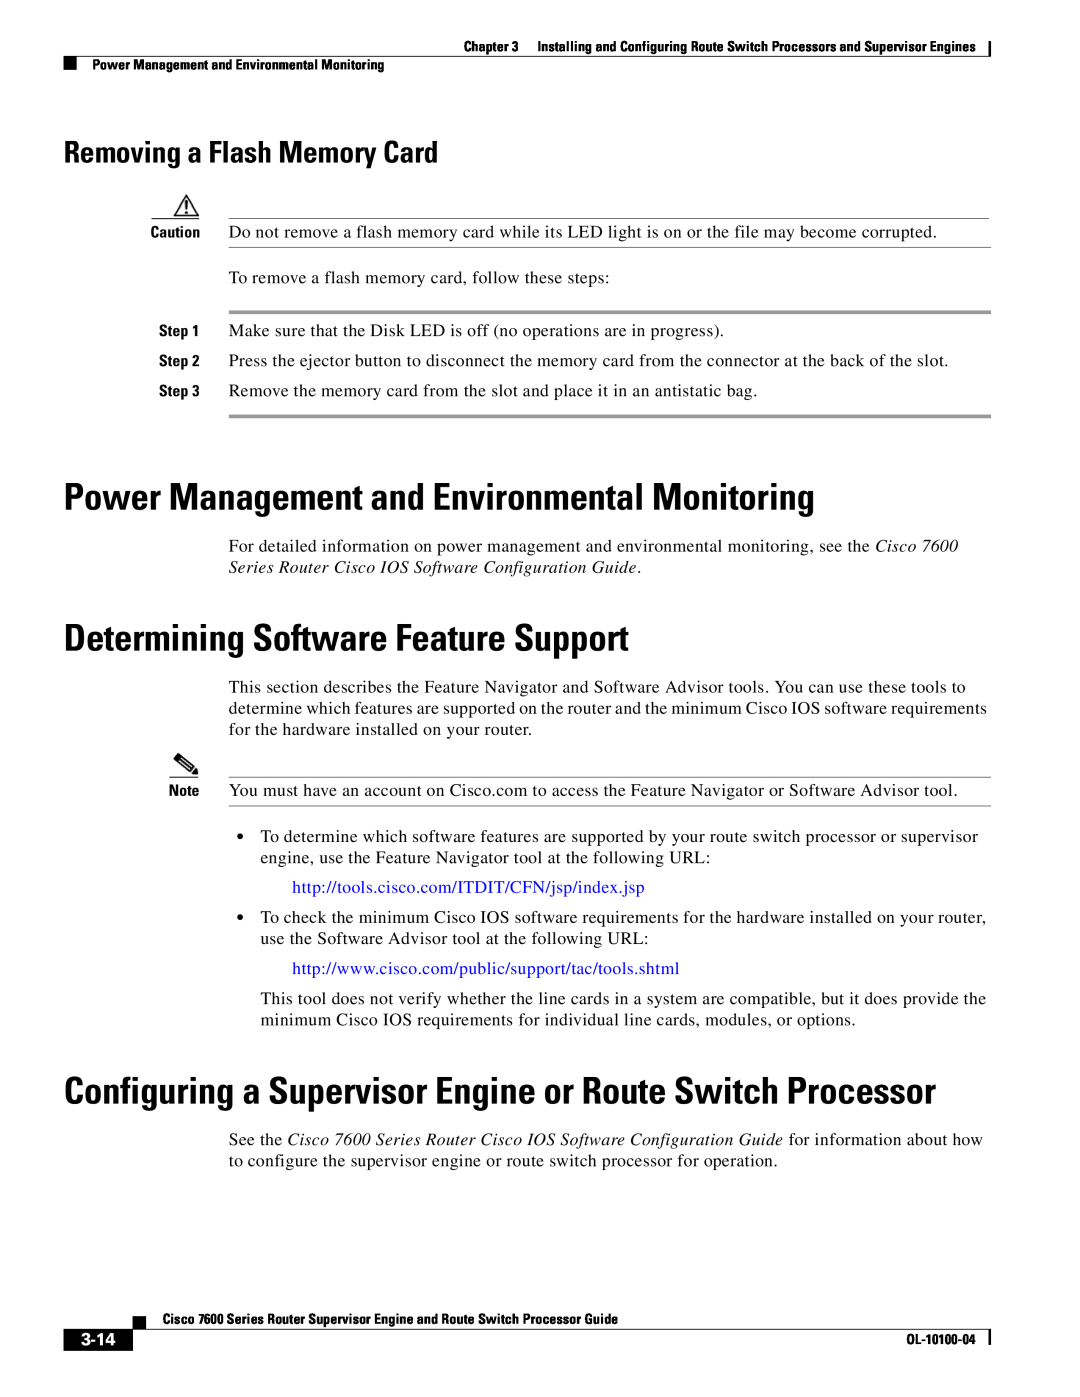 Cisco Systems 7600 manual Power Management and Environmental Monitoring, Determining Software Feature Support, 3-14 